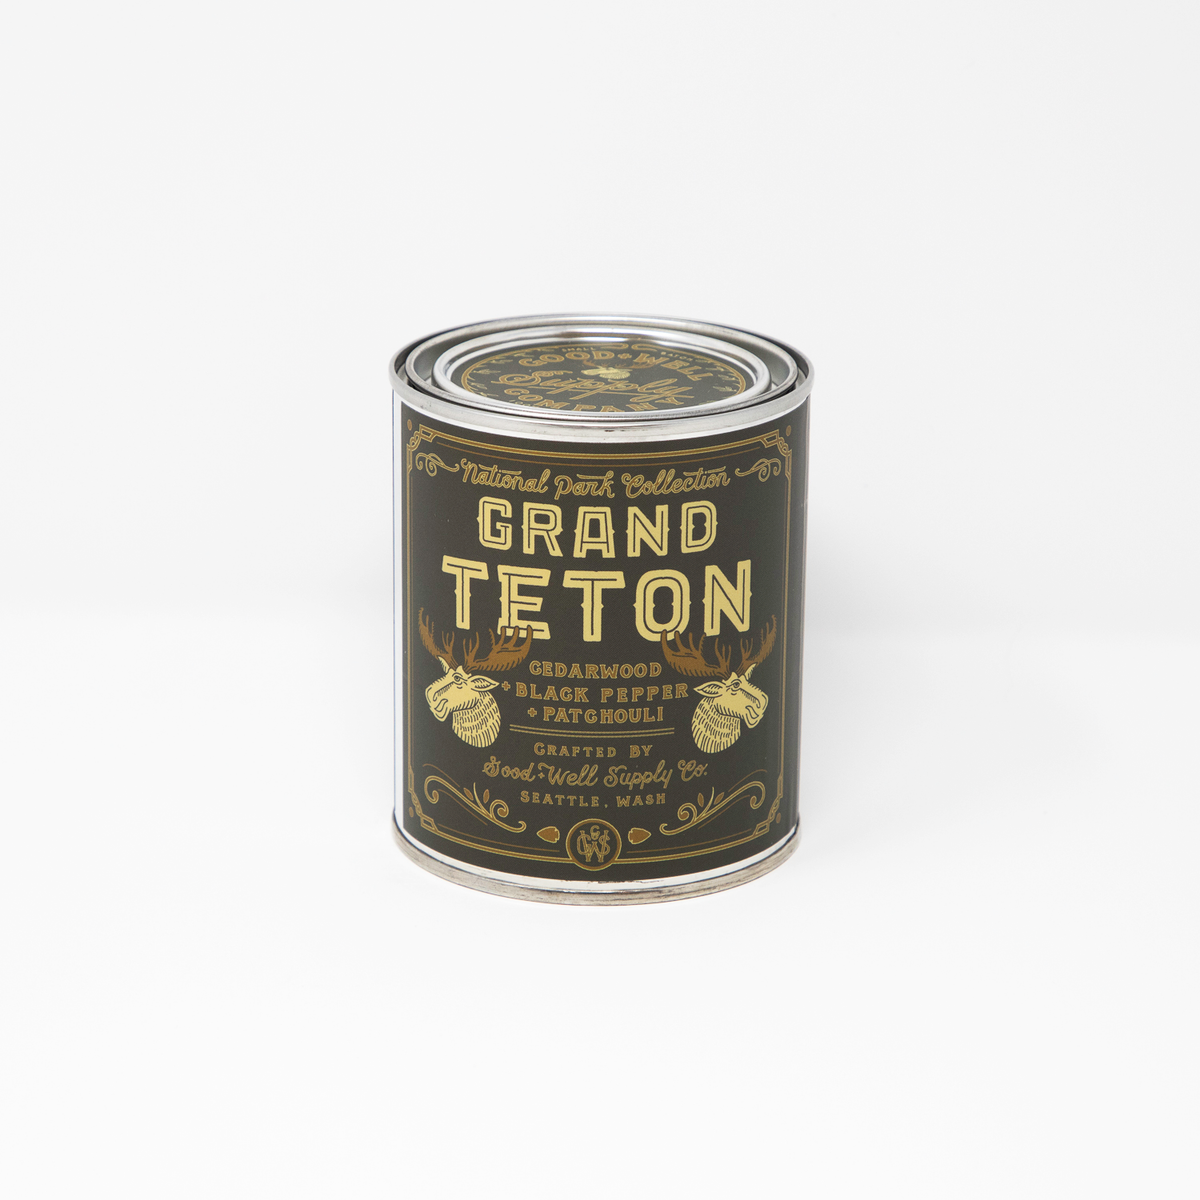 Grand Teton Inspired Soy Candle in a Tin Can